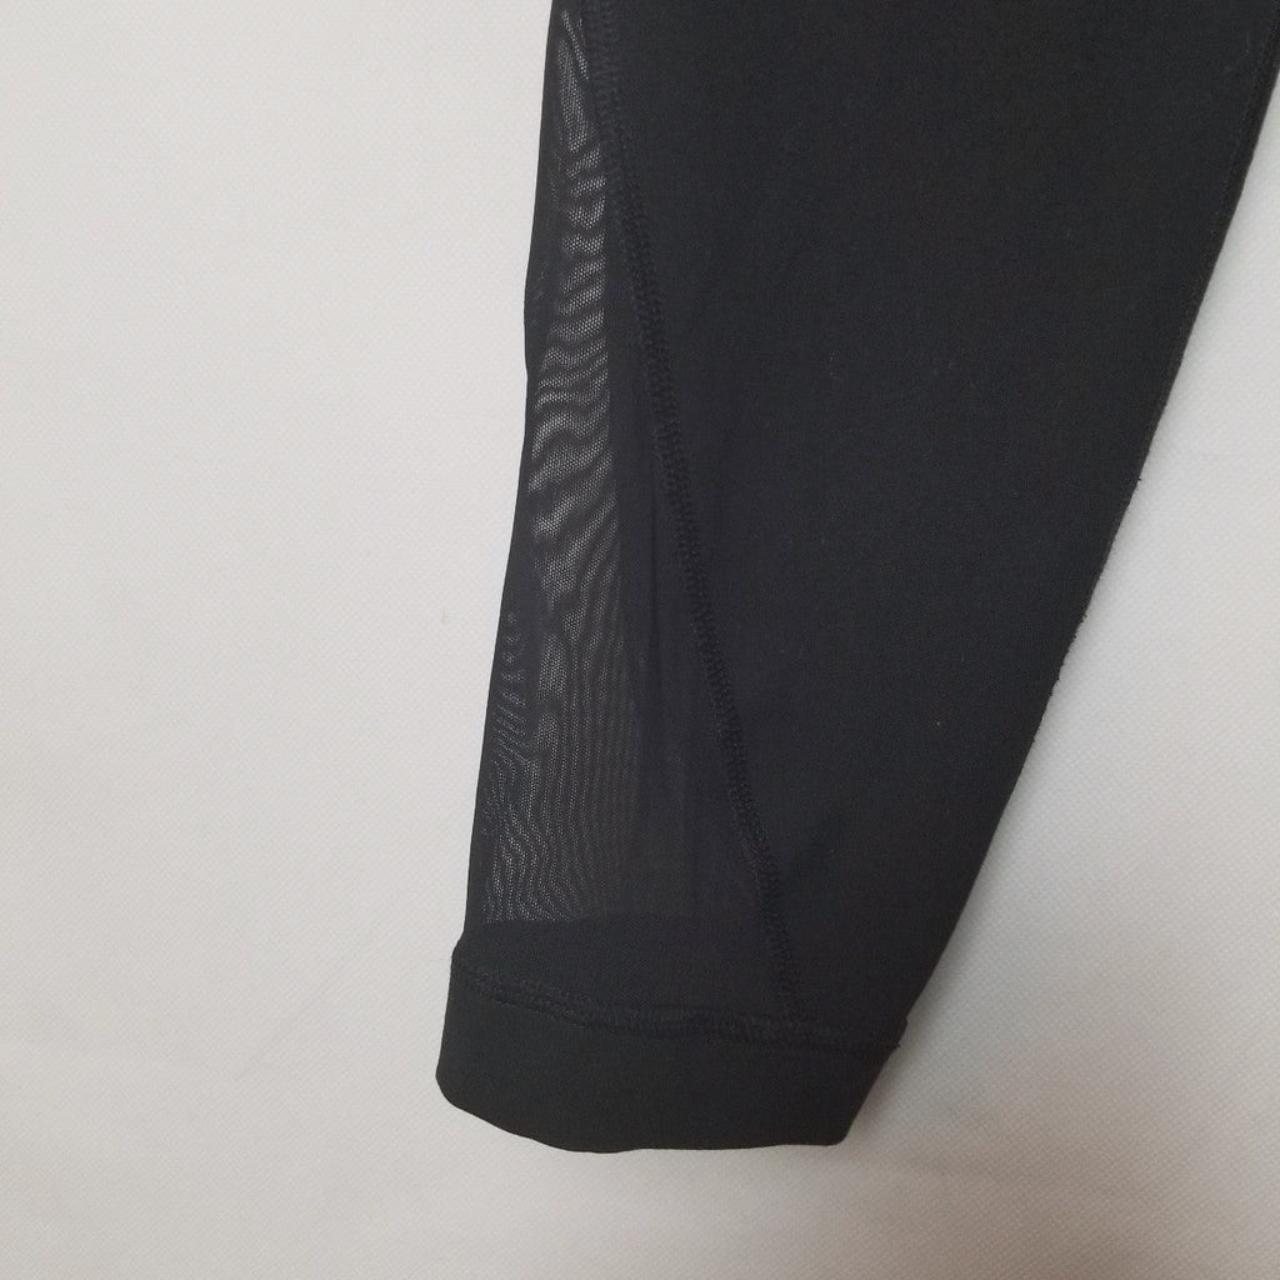 Gently used Old Navy Active leggings, high rise.